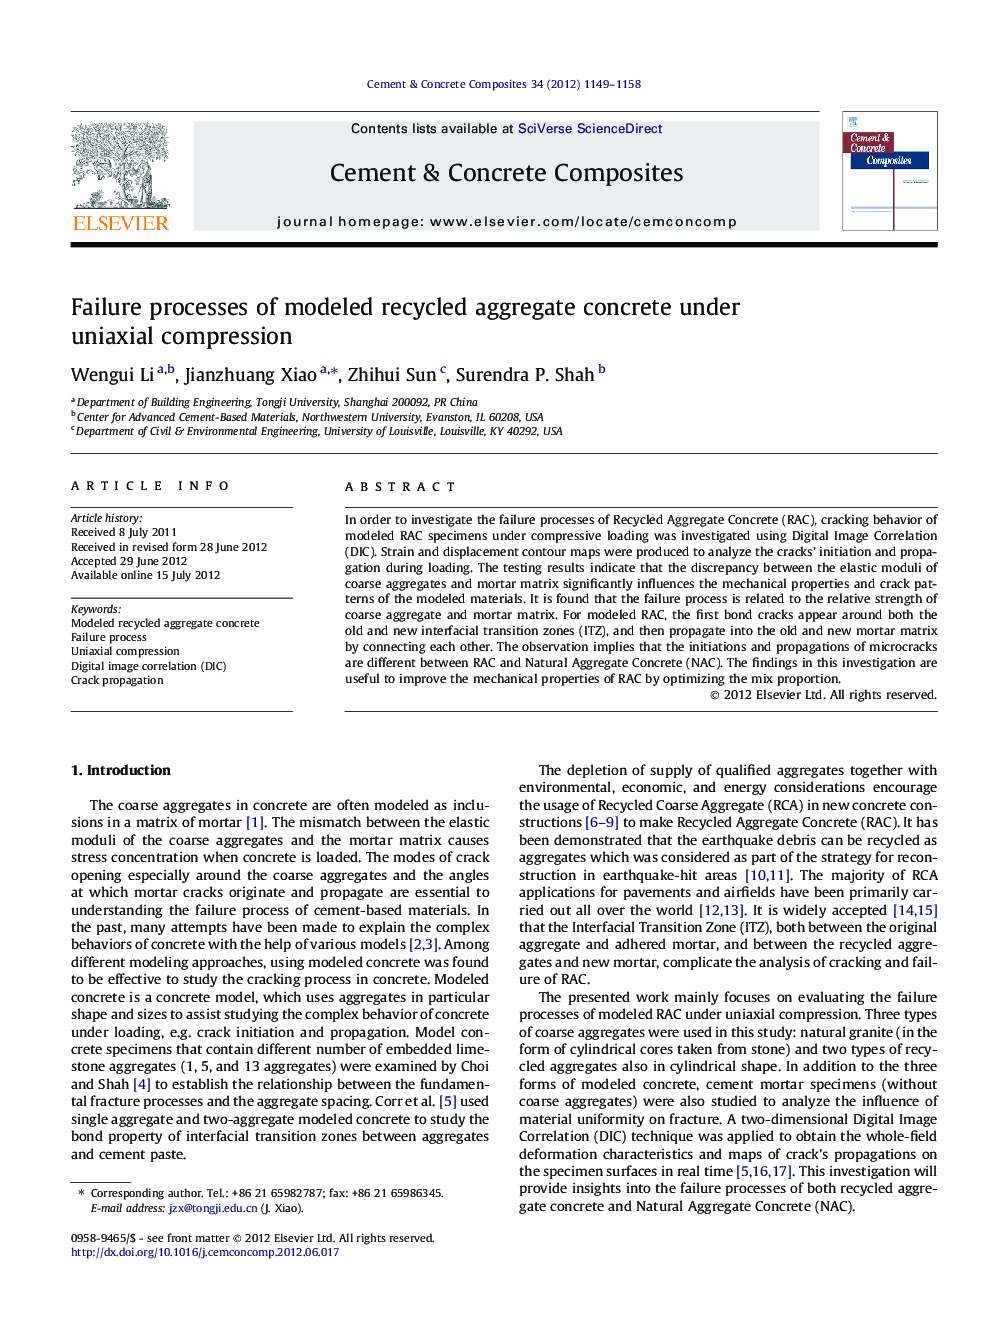 Failure processes of modeled recycled aggregate concrete under uniaxial compression